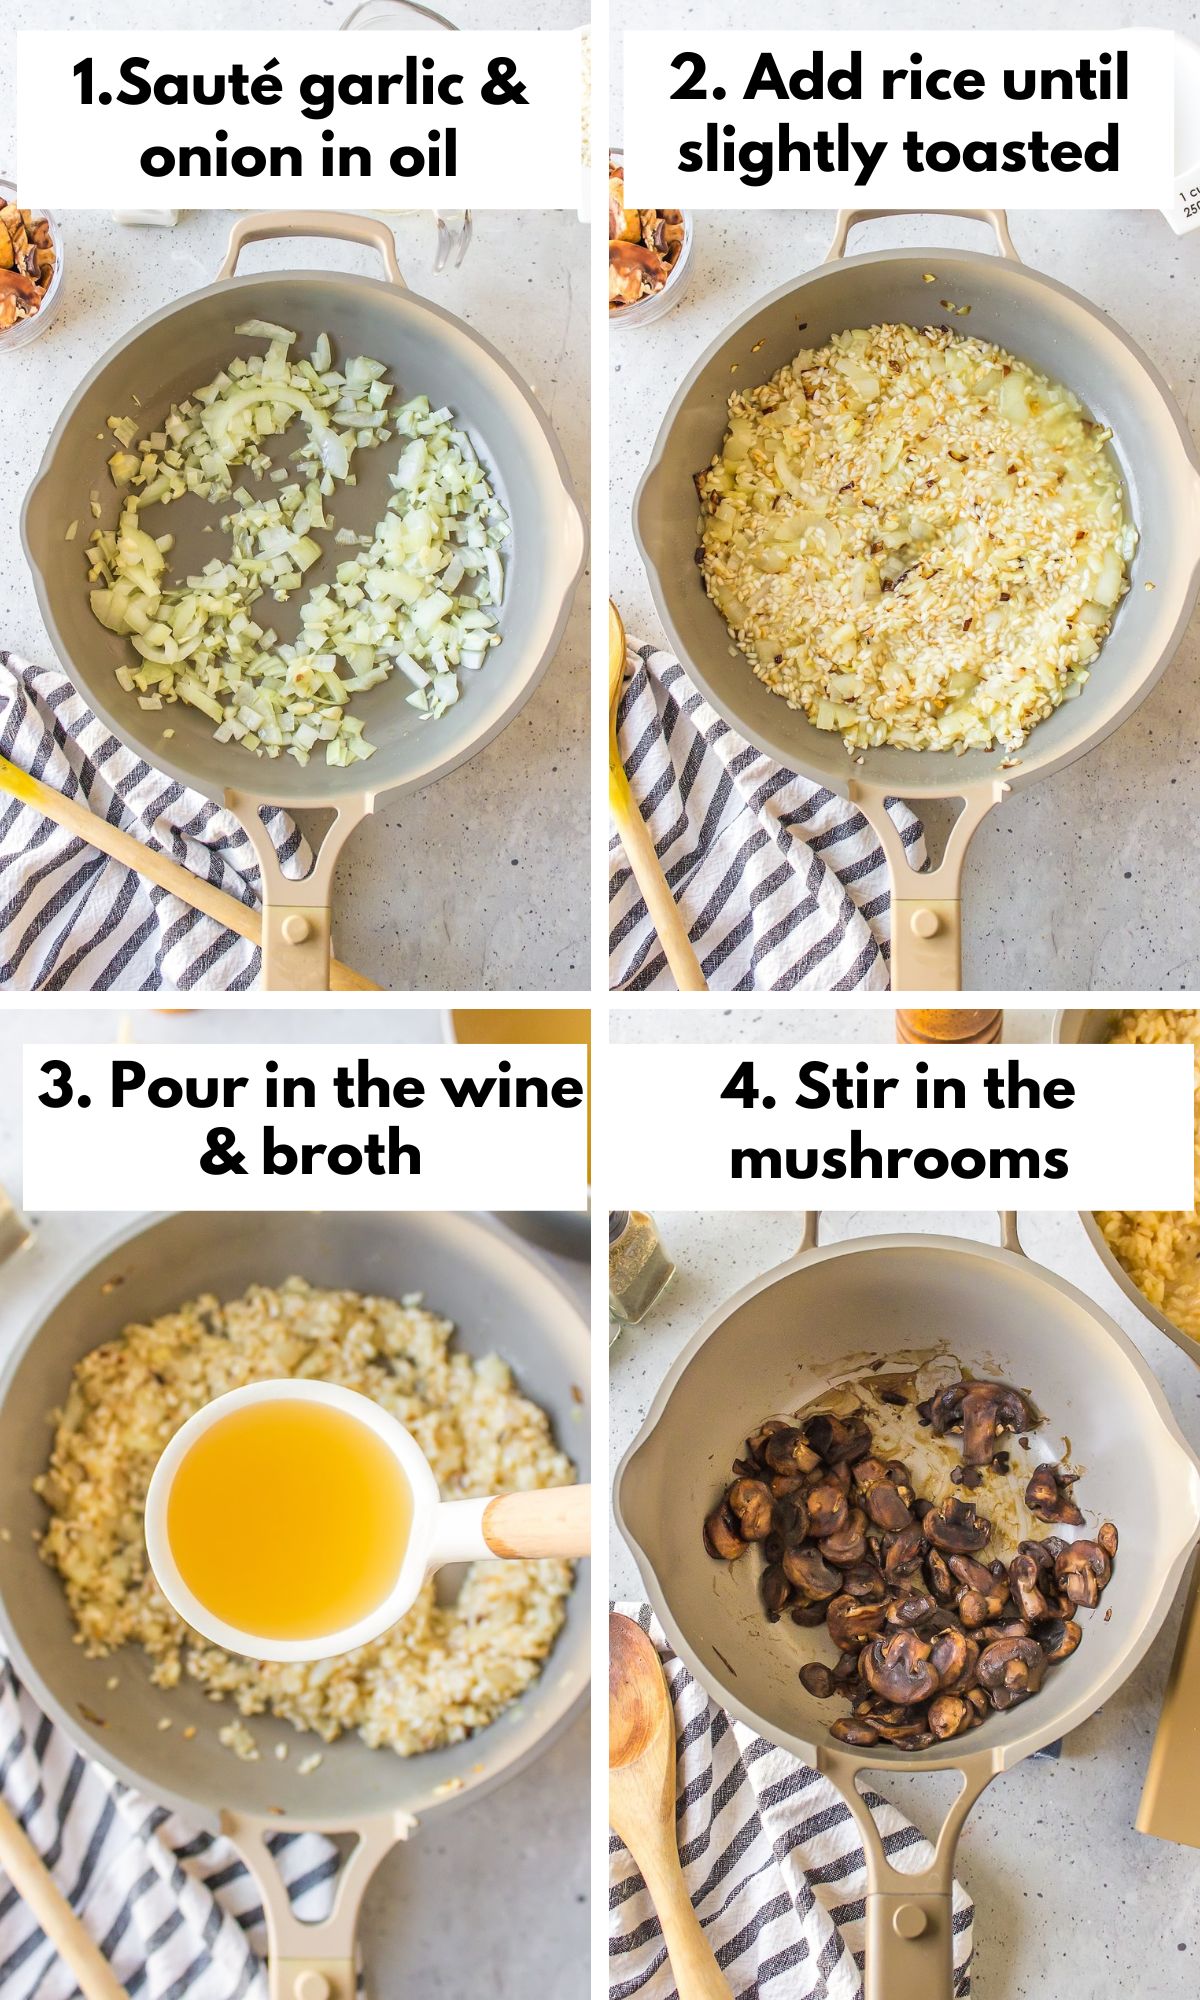 process for making gluten-free risotto.